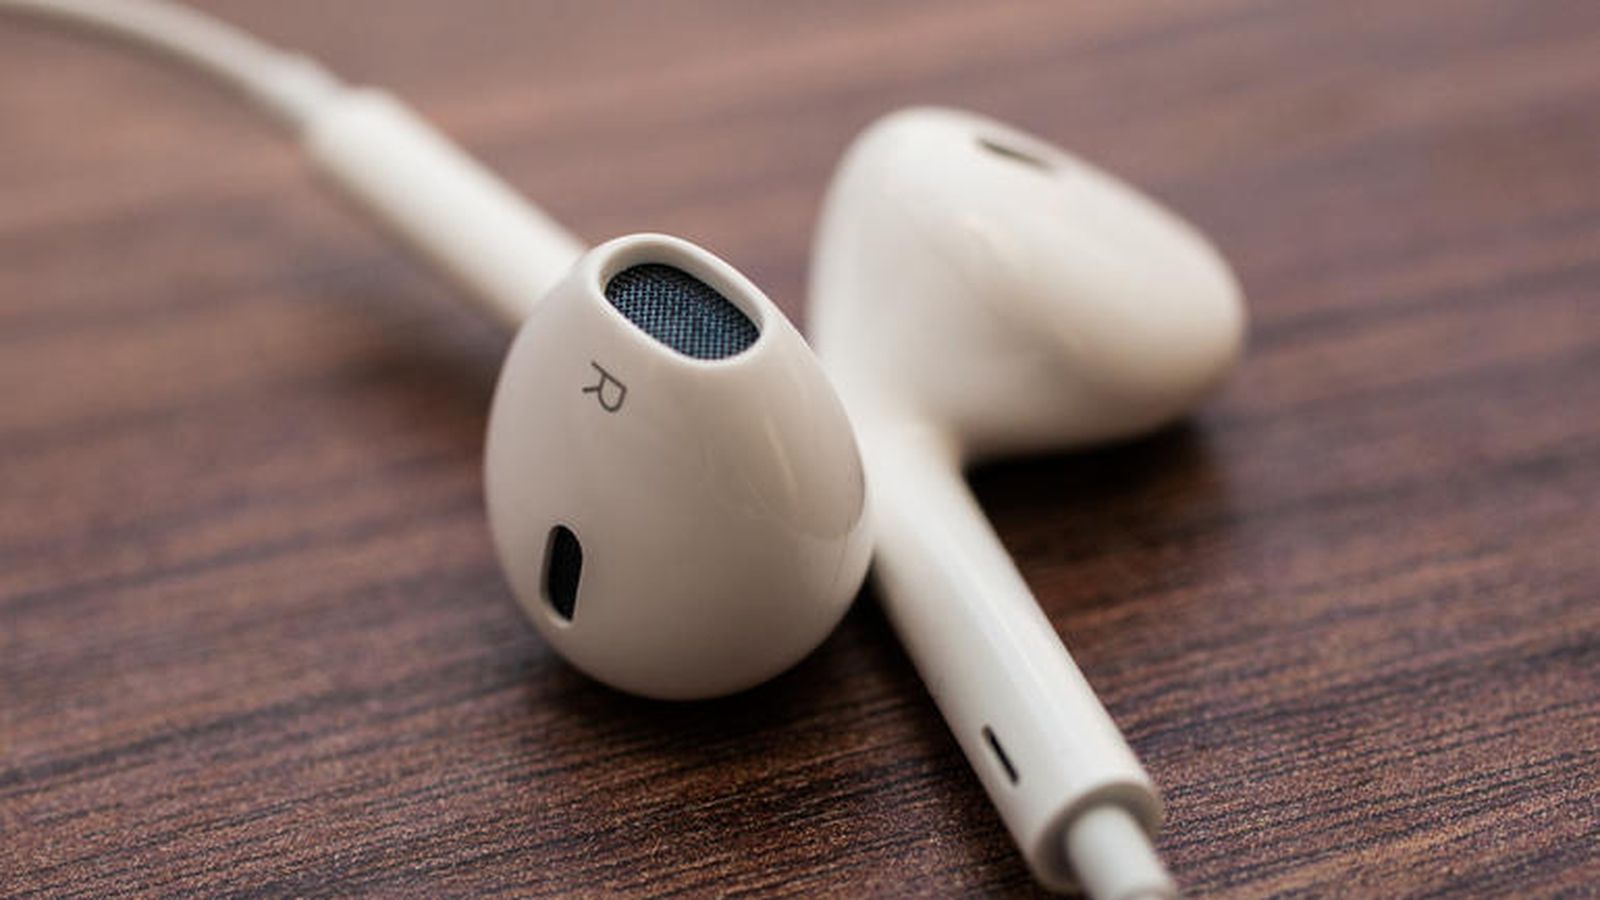 Kuo: iPhone 12 Not Come With EarPods the Box, Apple to Introduce AirPods Promotion in Second Half of 2020 - MacRumors